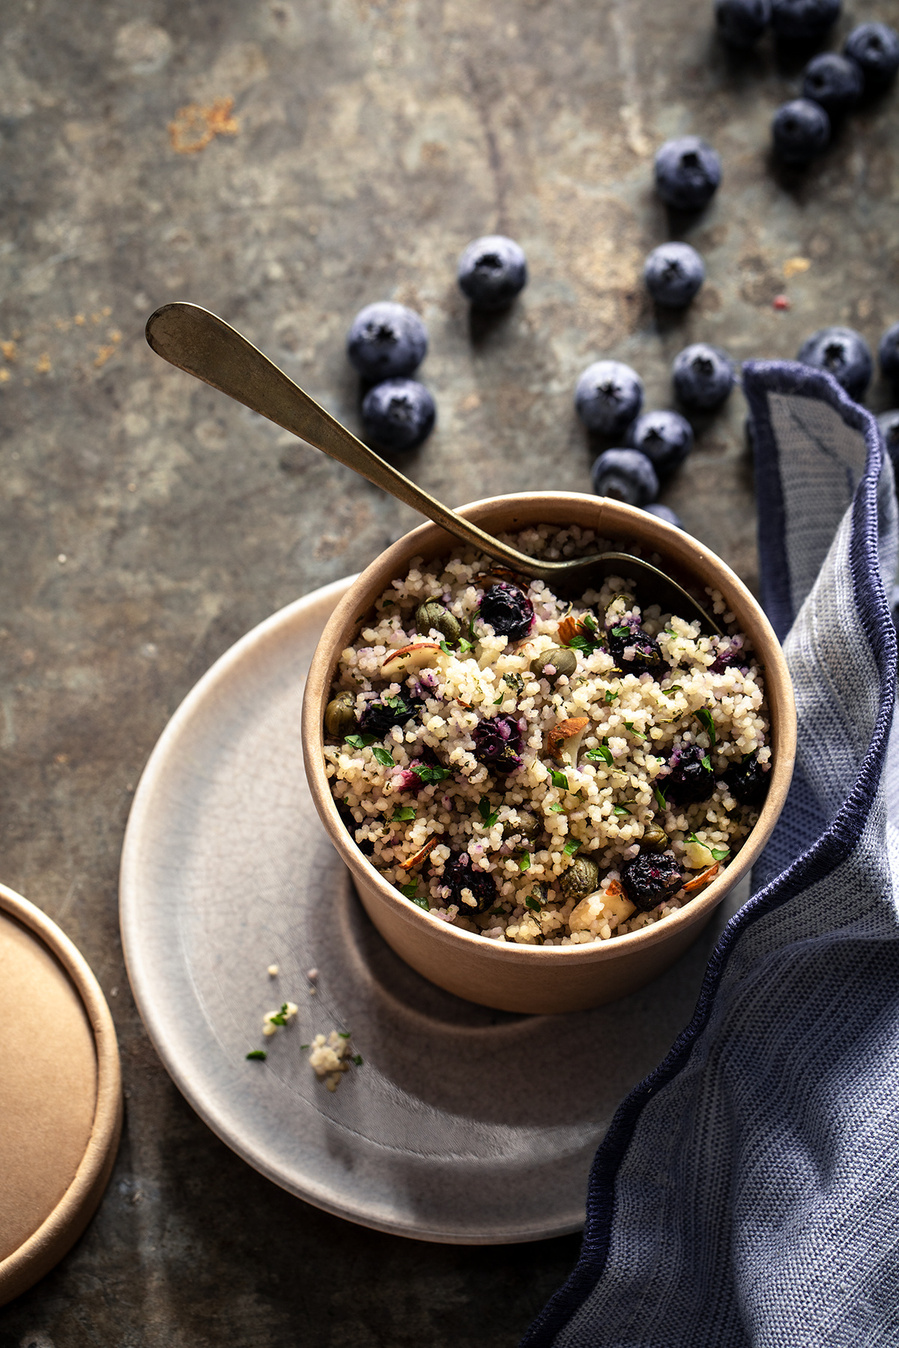 Blueberry quinoa salad in a small croc with a spoon. Sun with moody shadows with stoneware props and more blueberries on surface. 